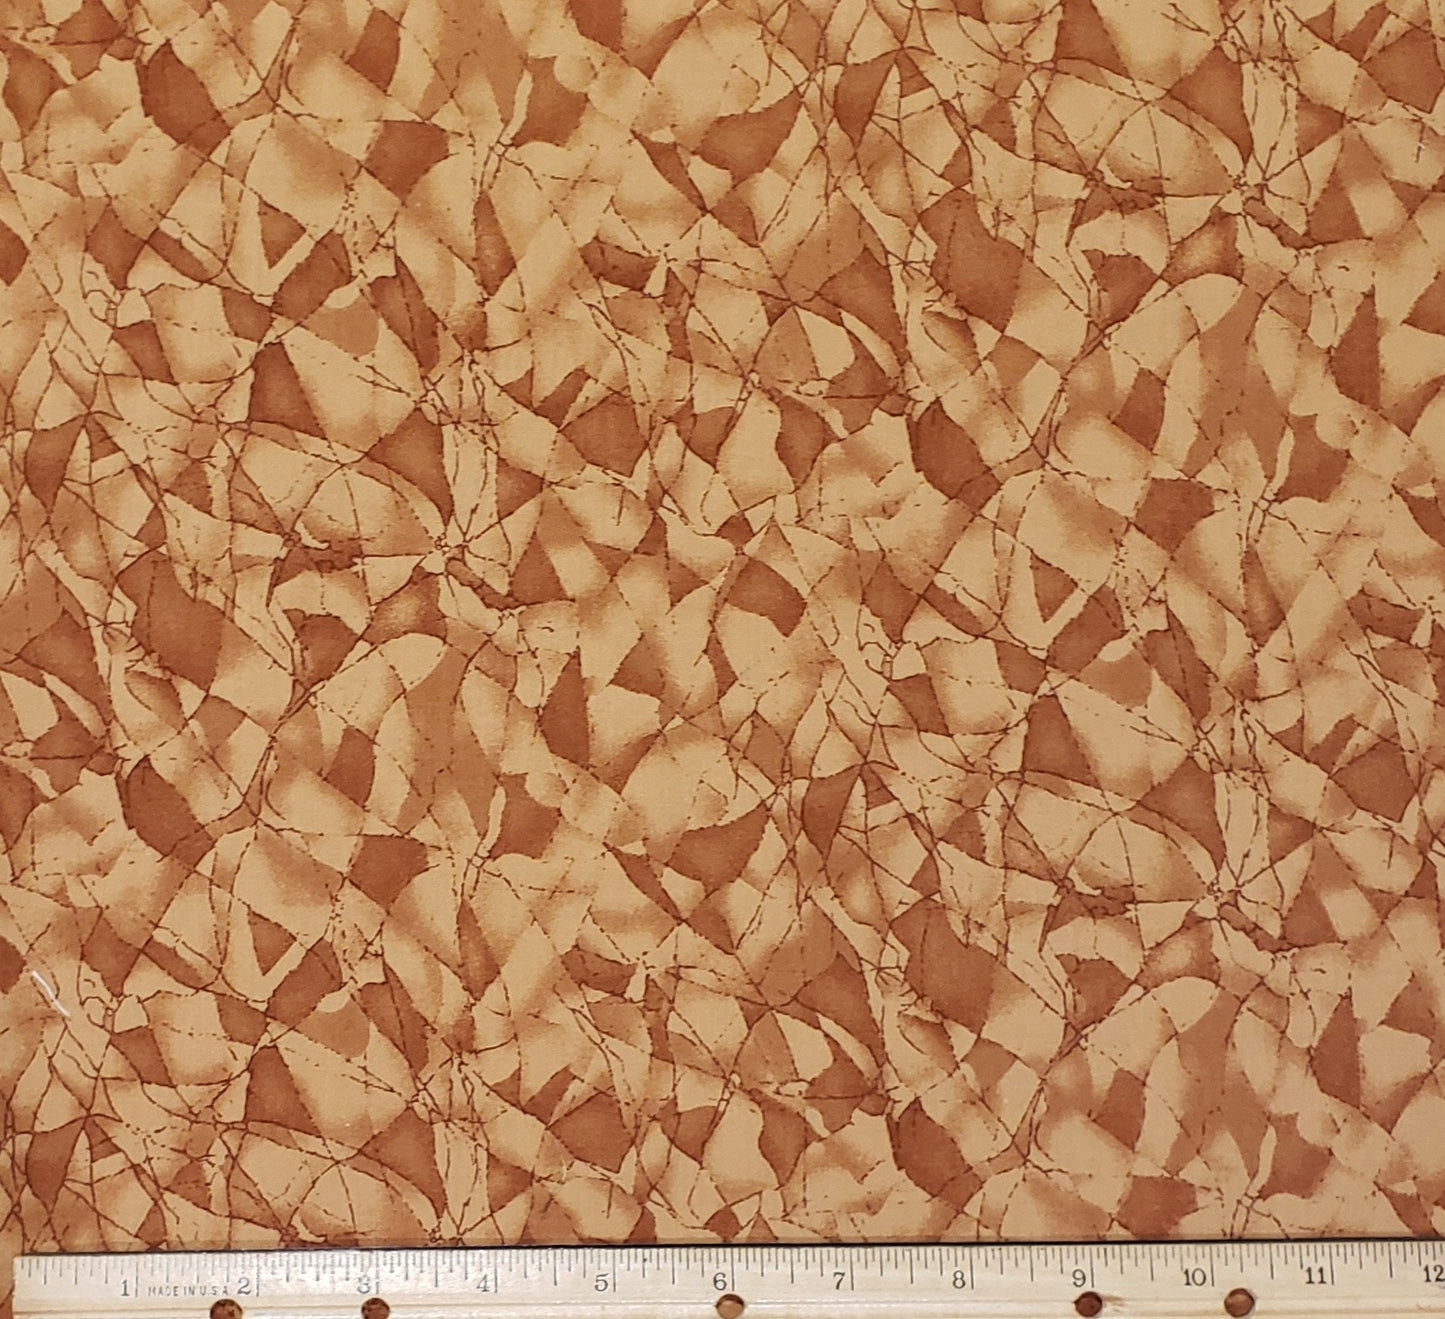 2004 Fabric Traditions - Brown and Tan Fabric